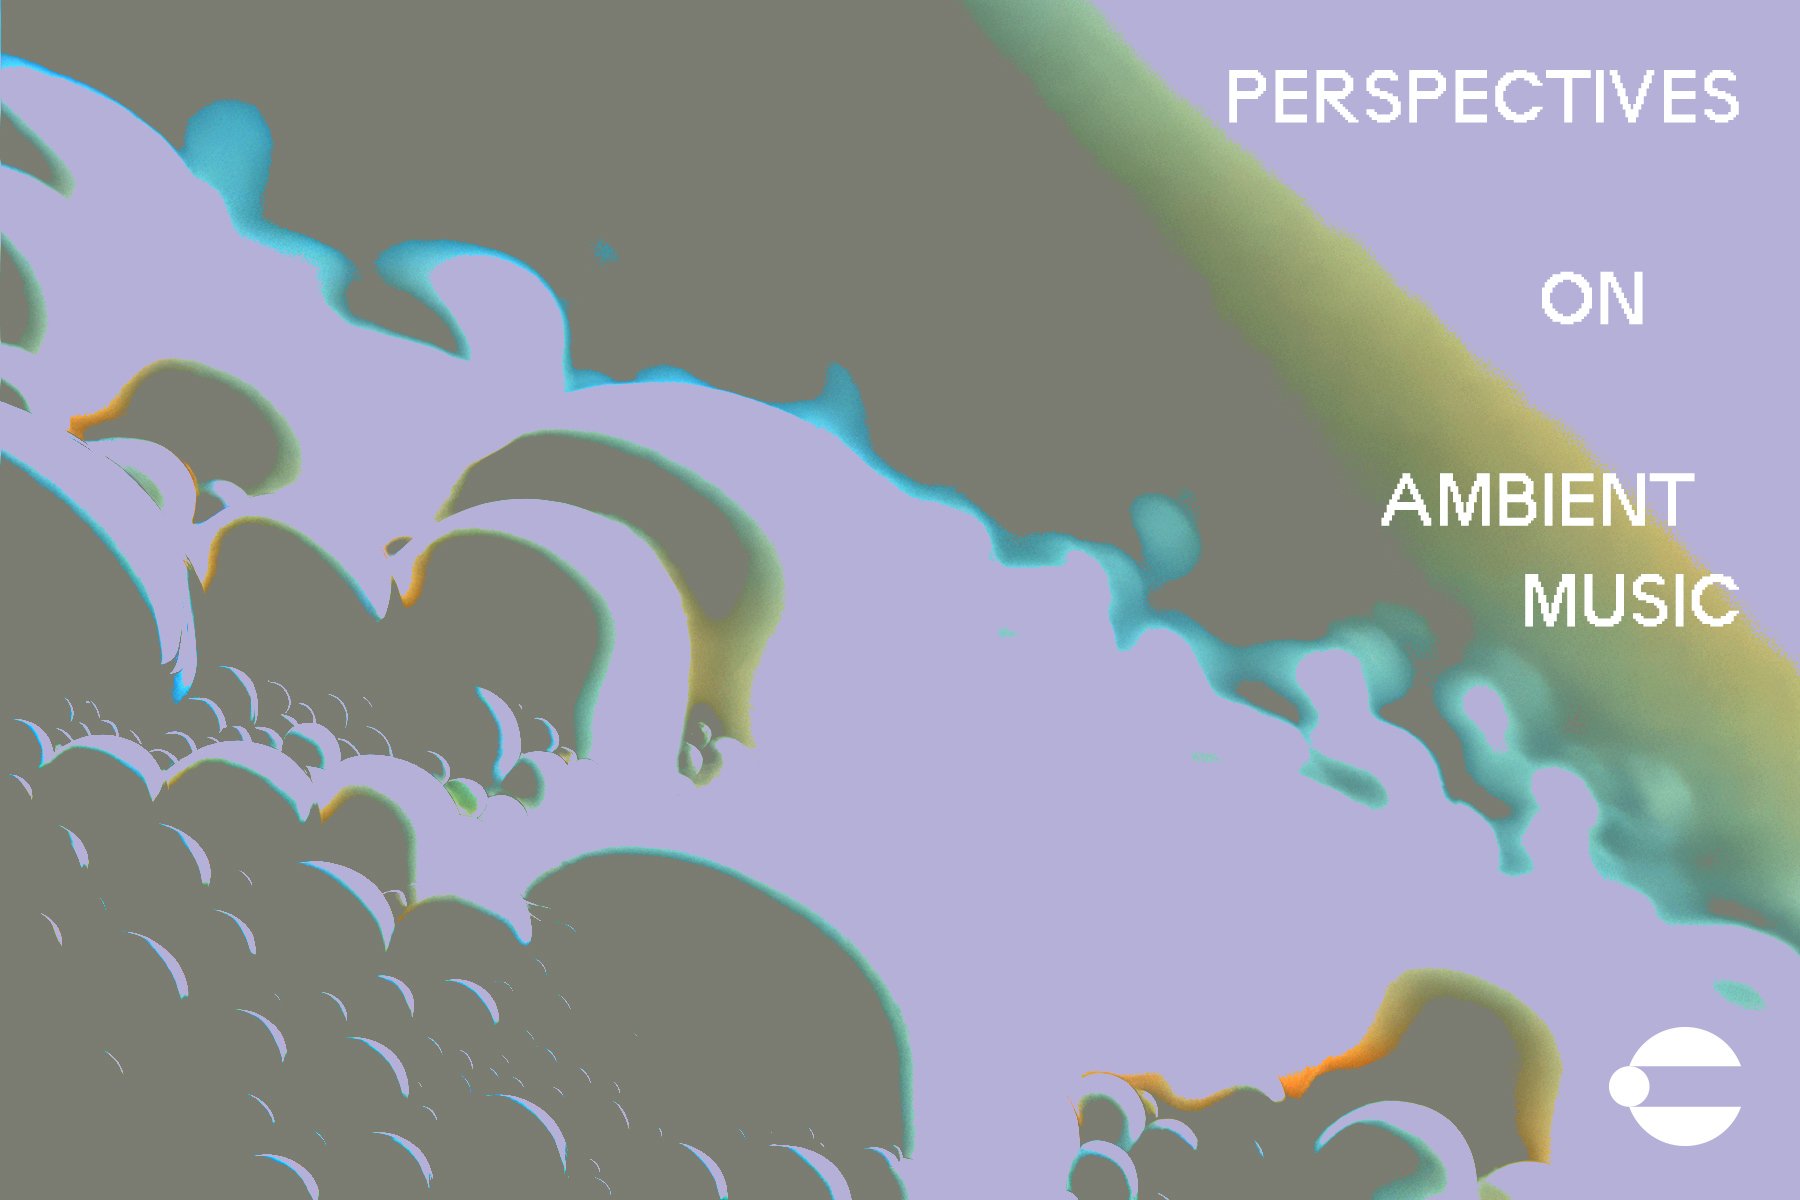 Perspectives on Ambient Music